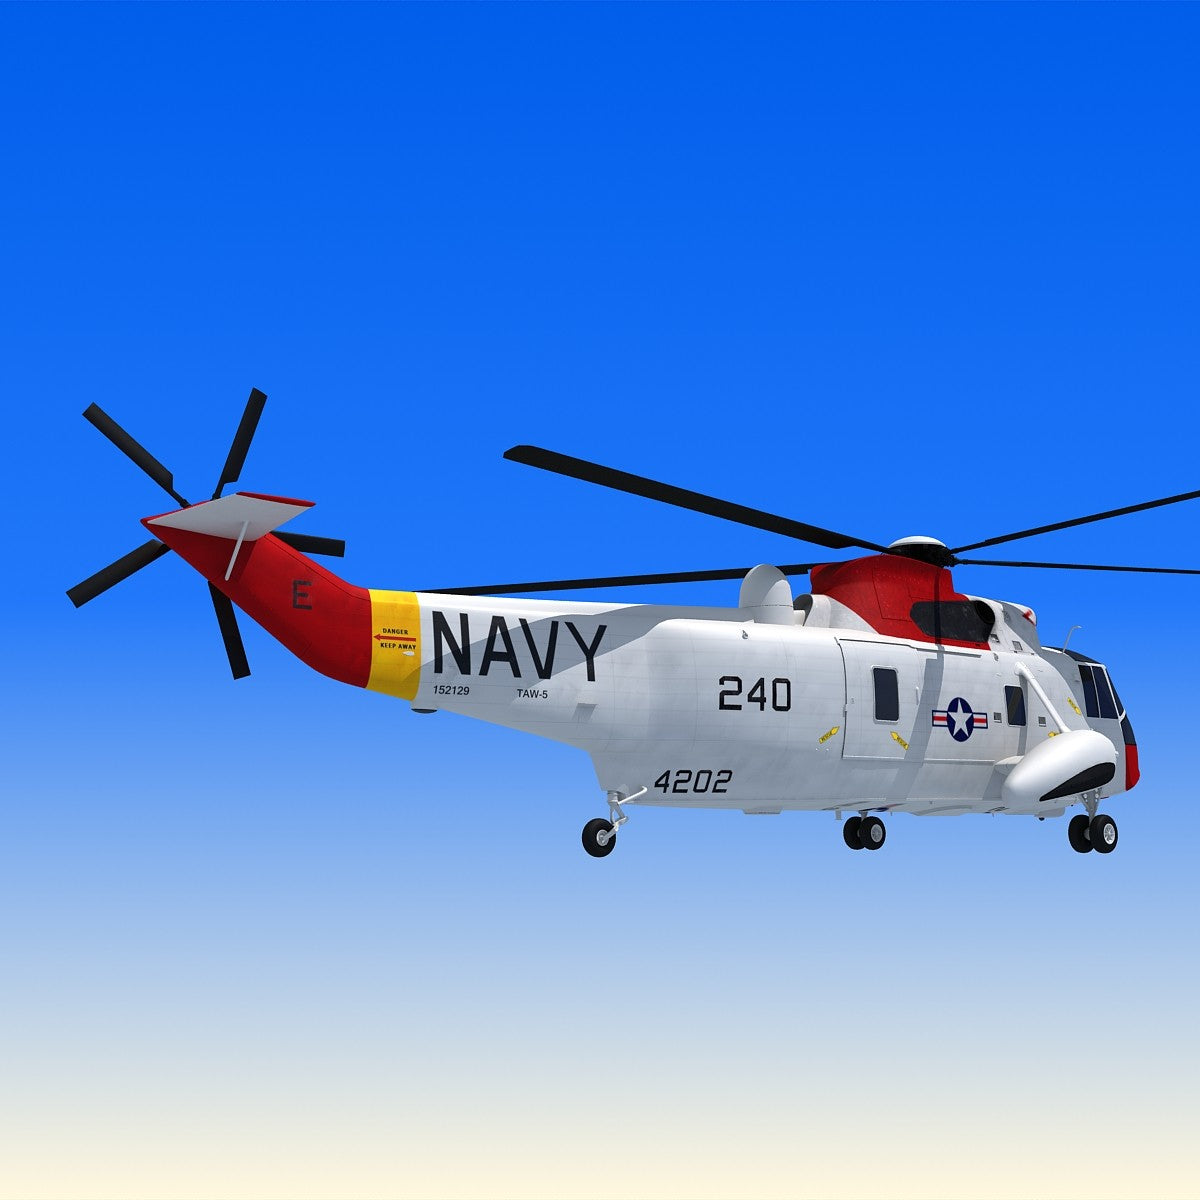 3D Helicopter Sikorsky SH-3 Sea King